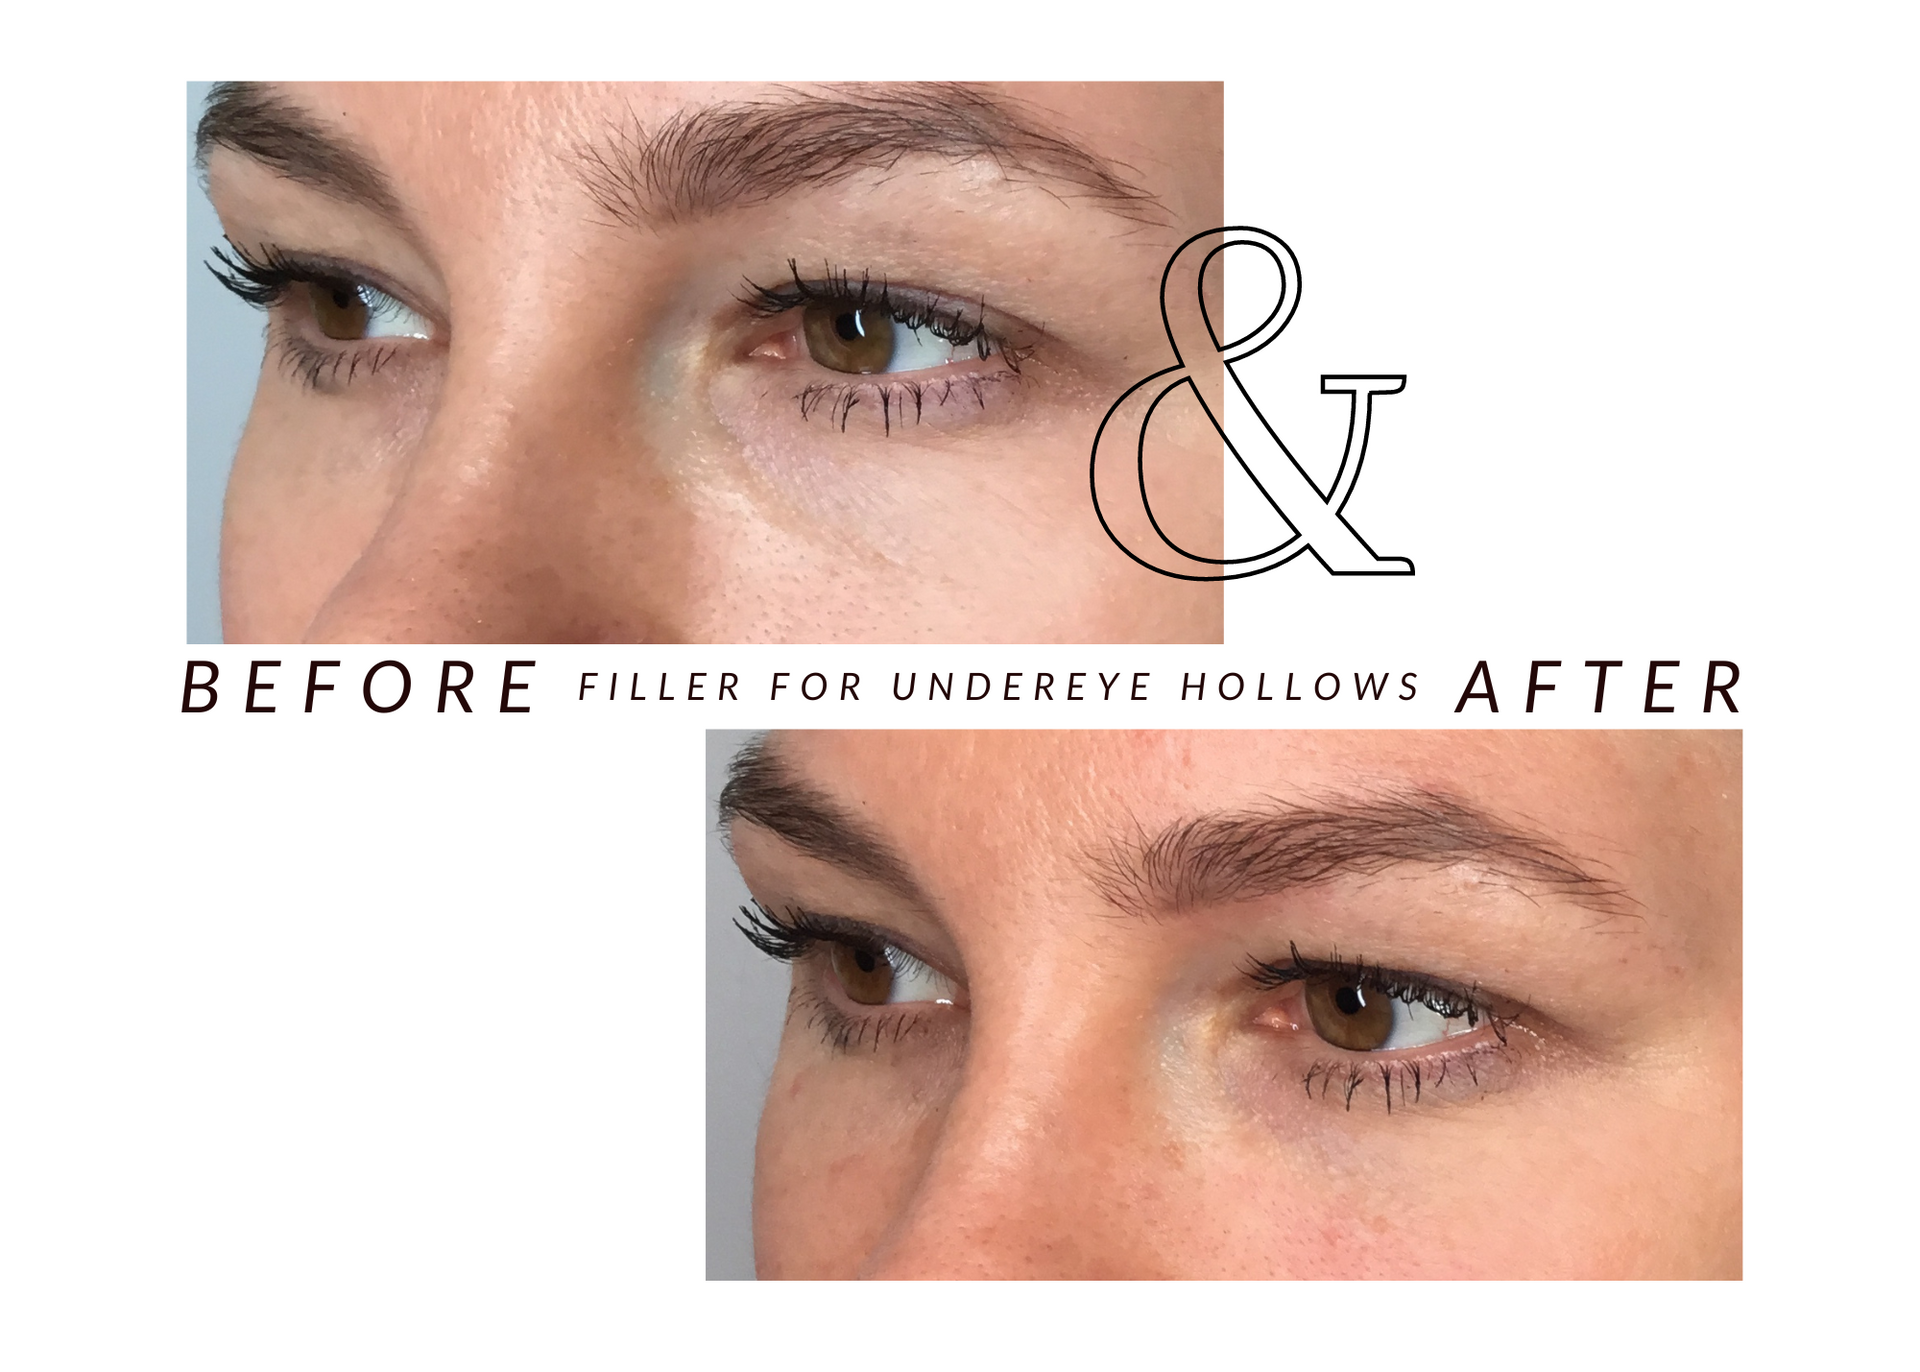 A before and after picture of a woman 's eye with filler for under eye hollow